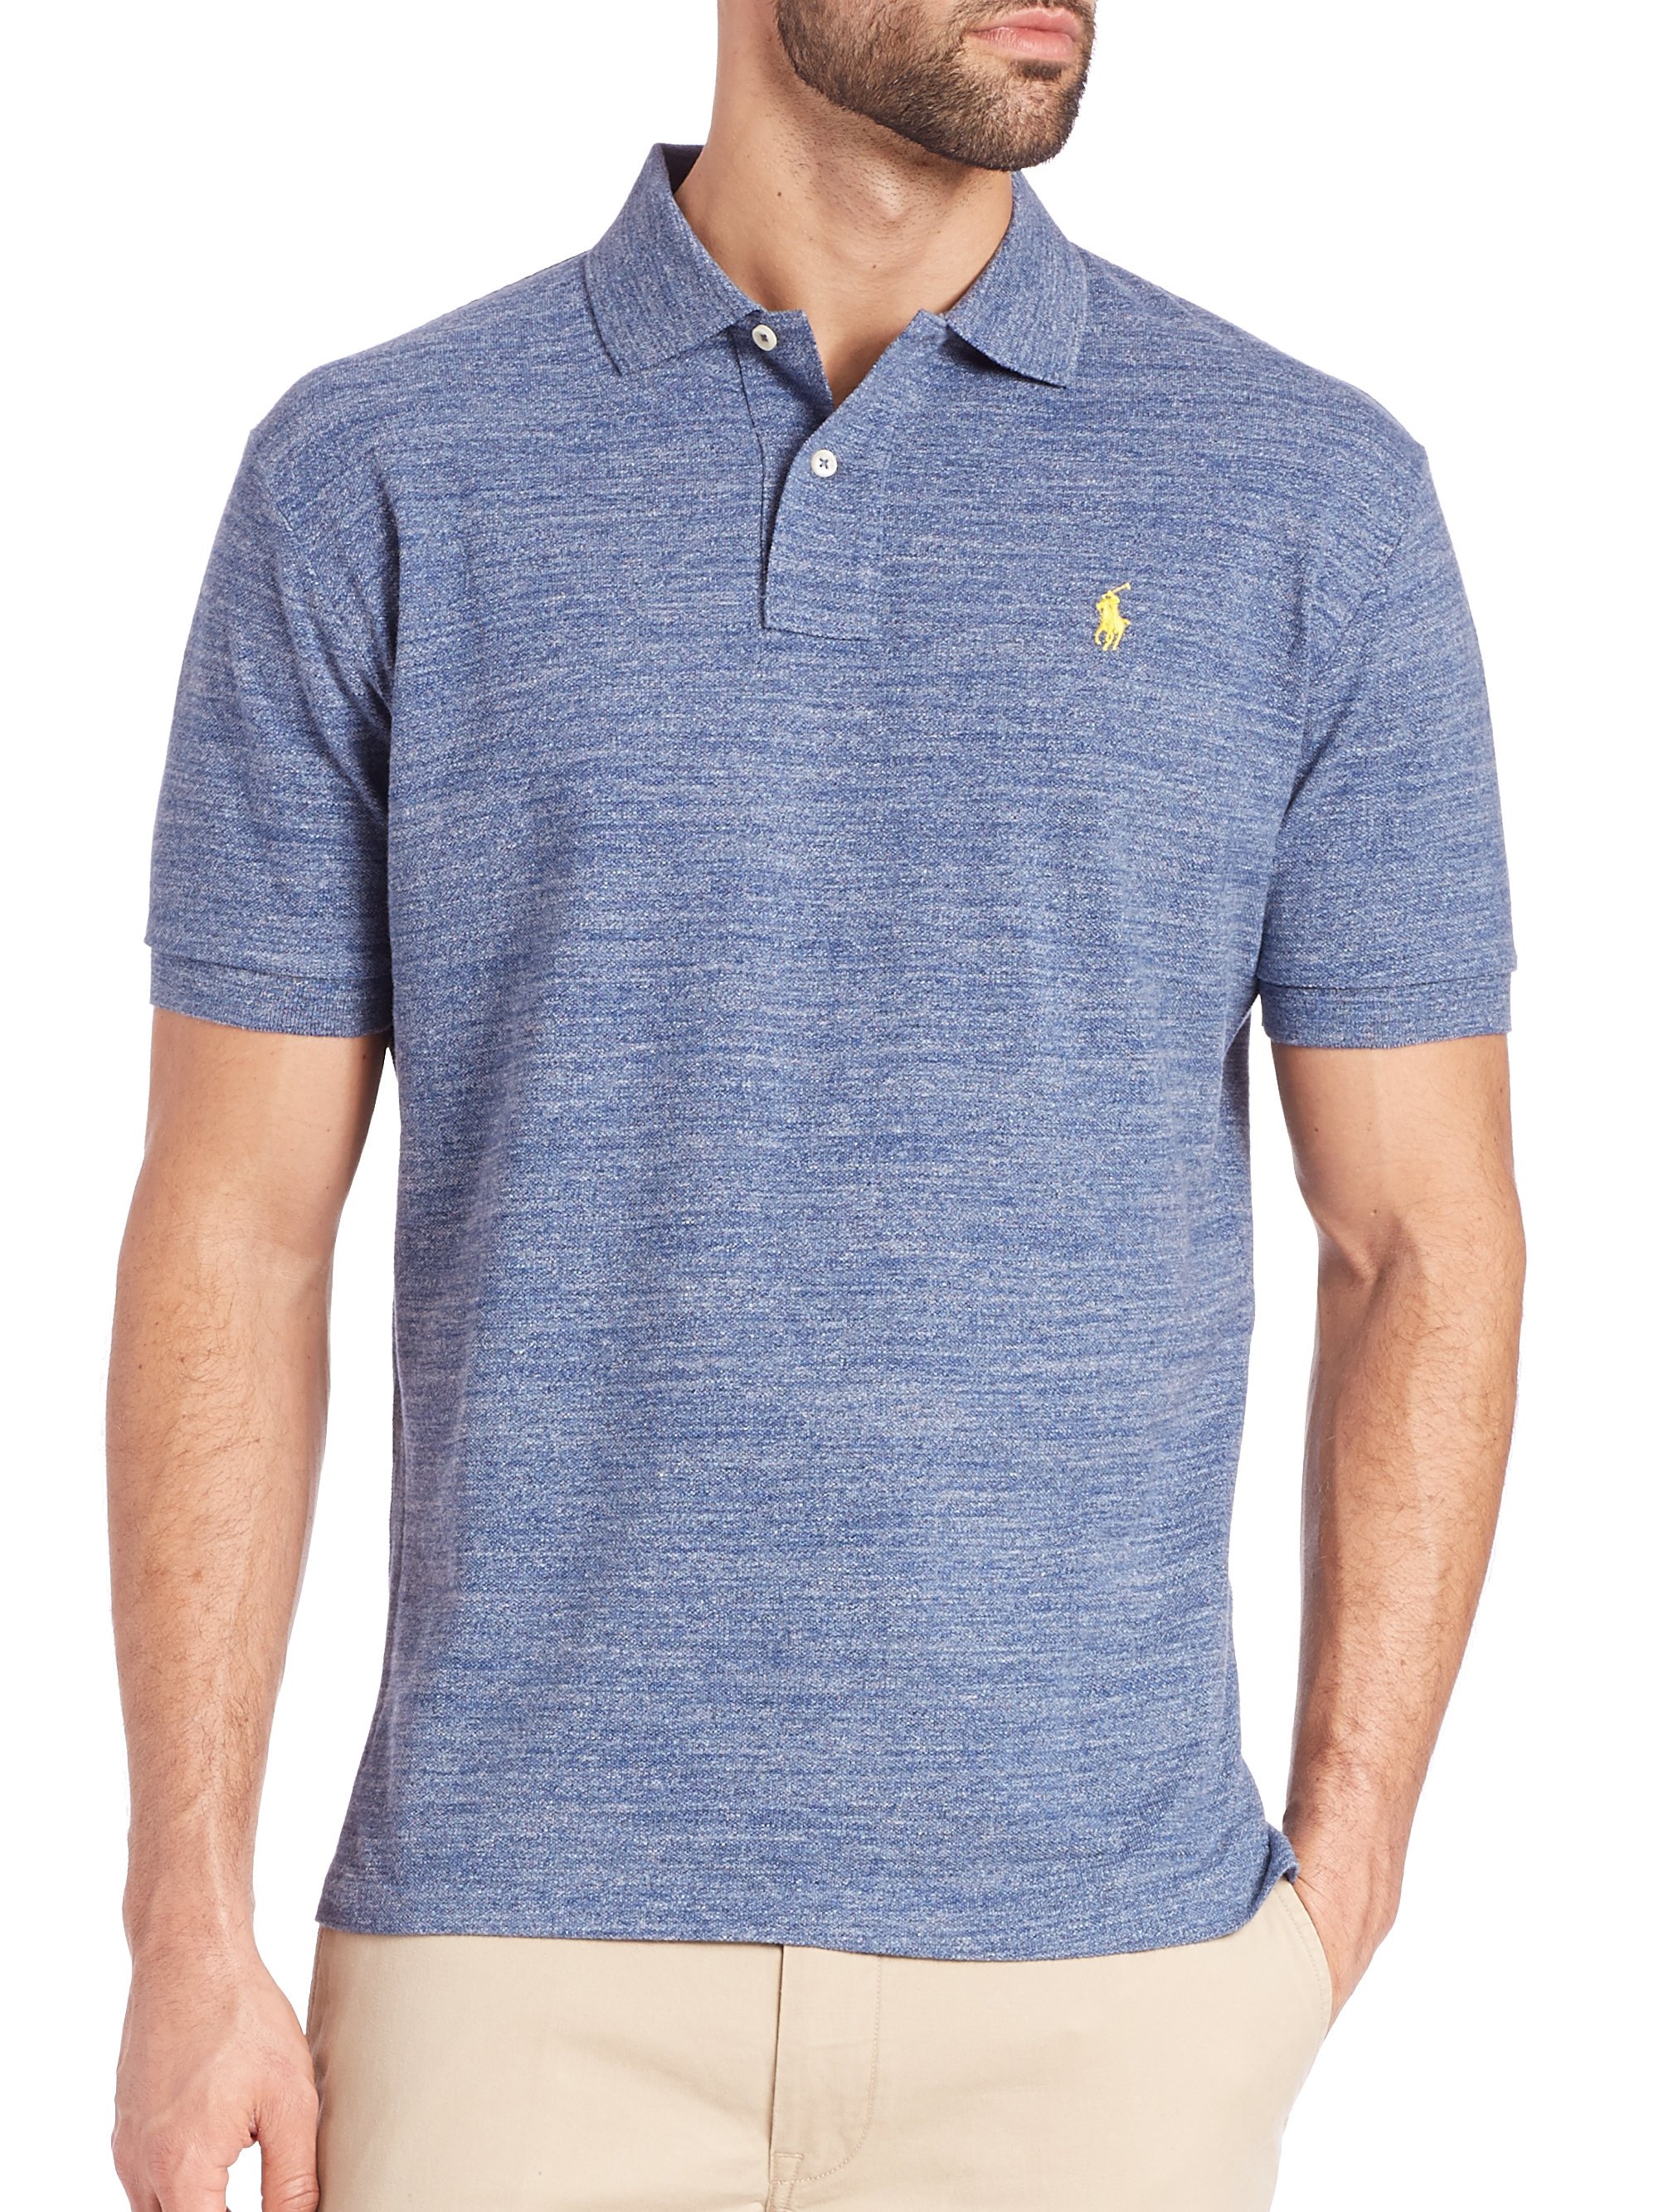 Lyst - Polo Ralph Lauren Heathered Polo Shirt in Blue for Men